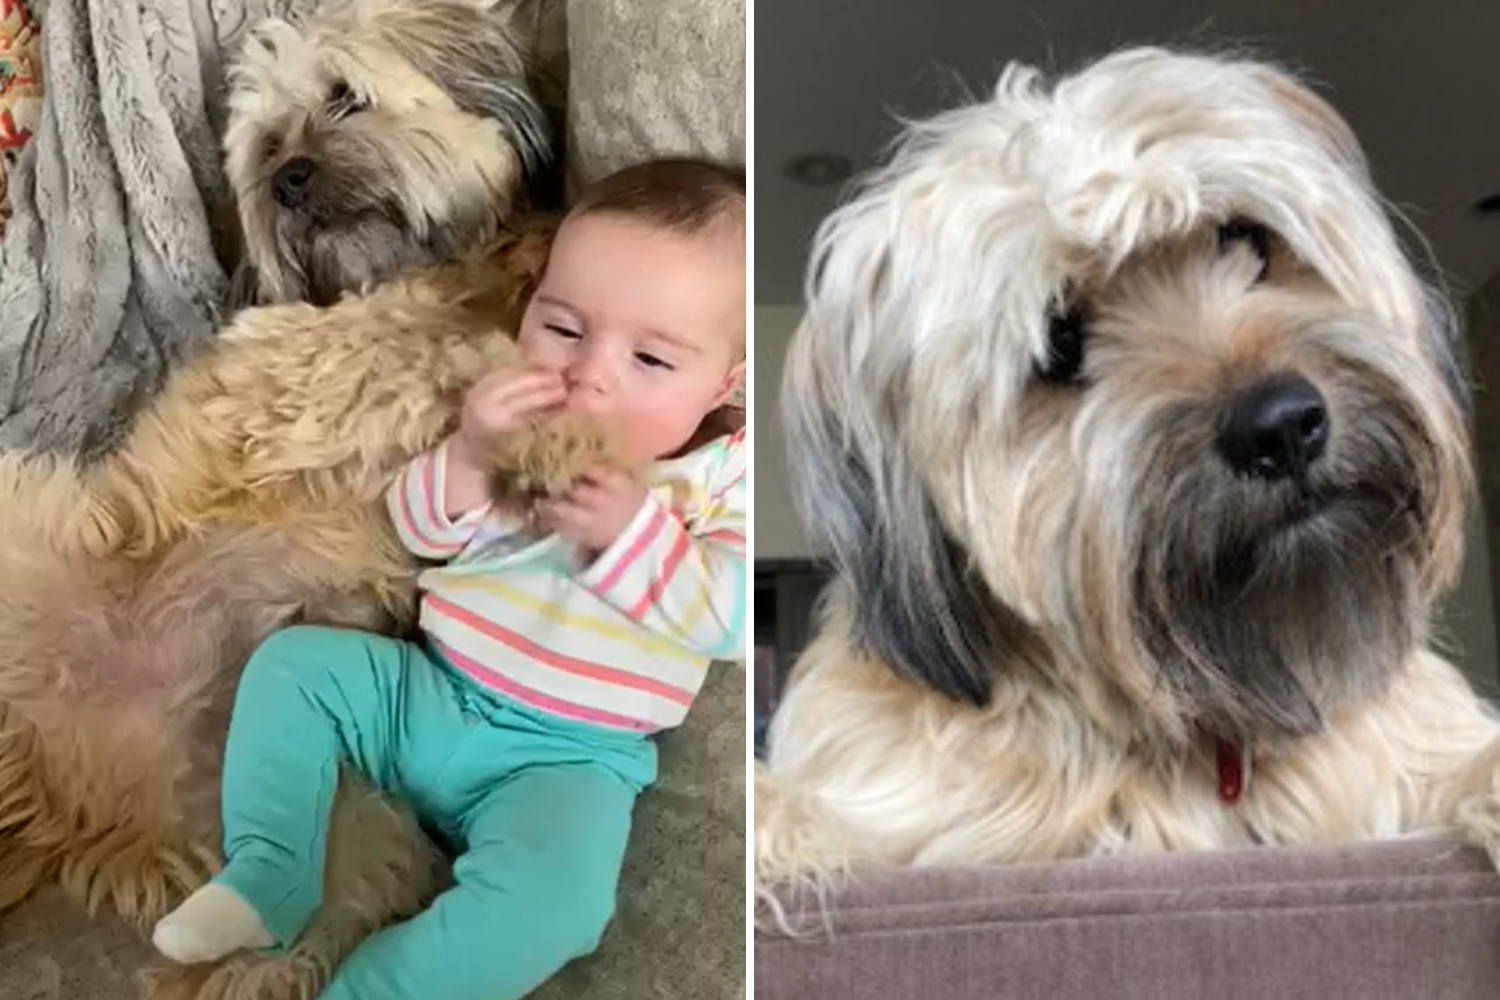 Dog spotted snuggling with owner's grandbaby in adorable video